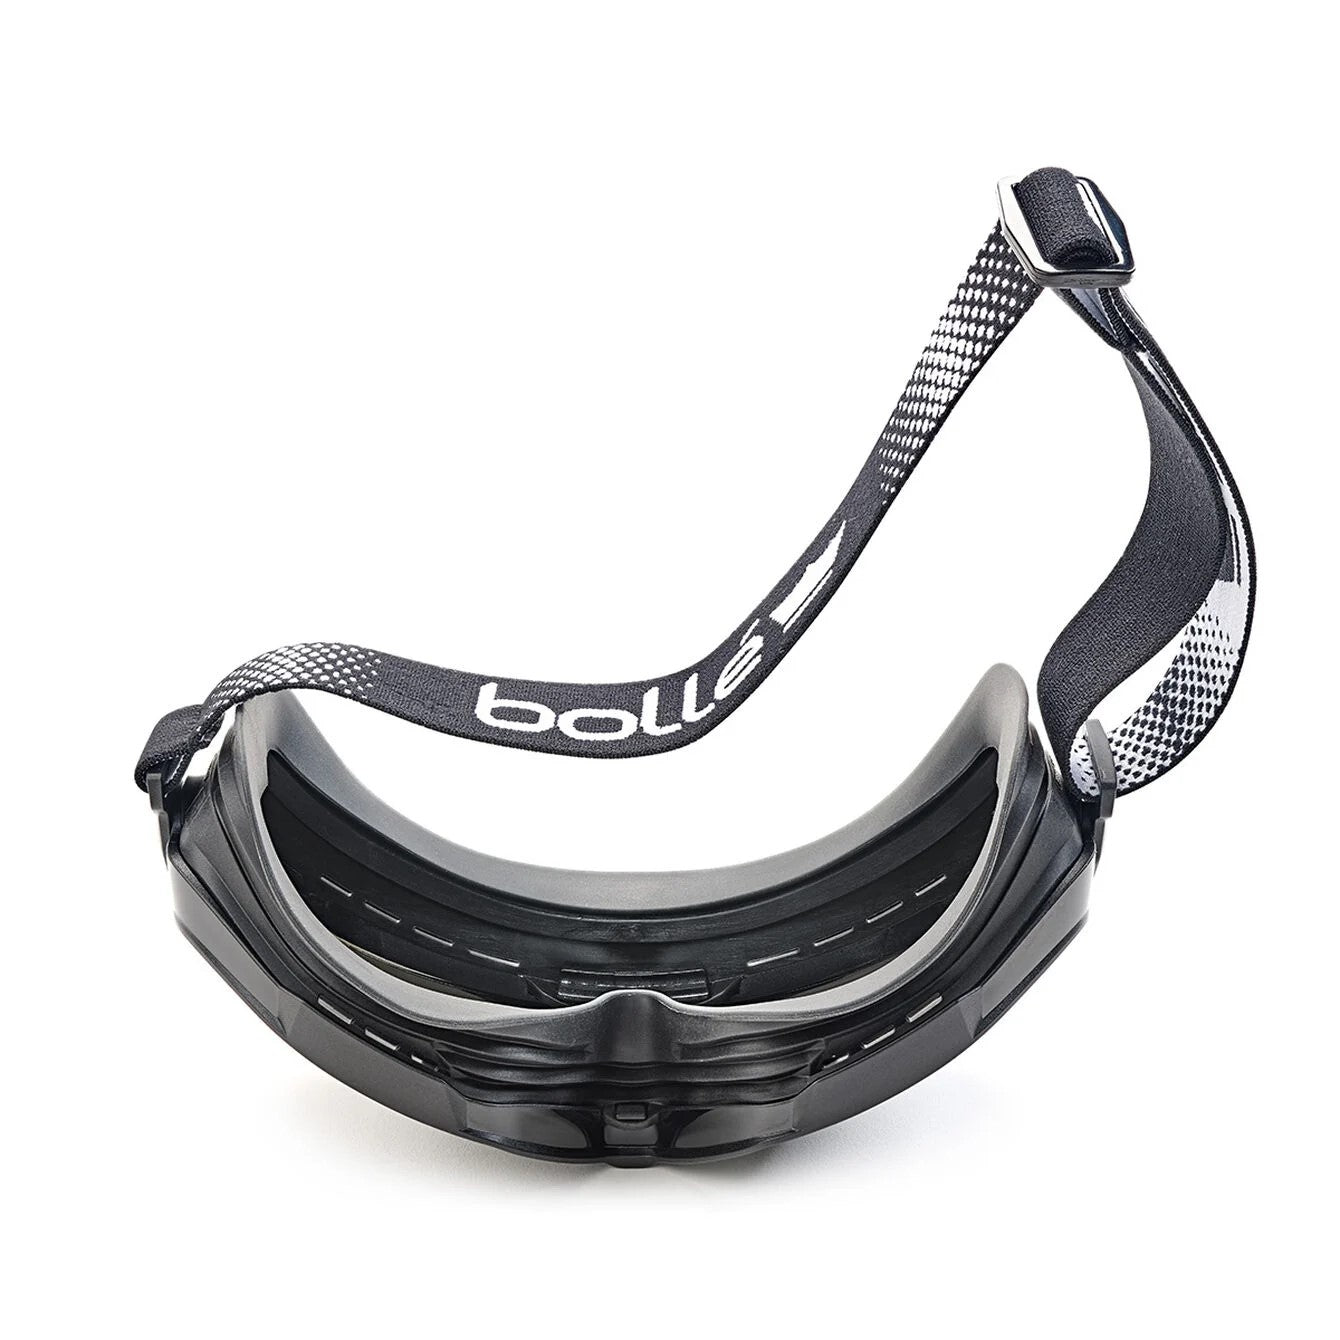 Bolle universal welding shade 5 goggles